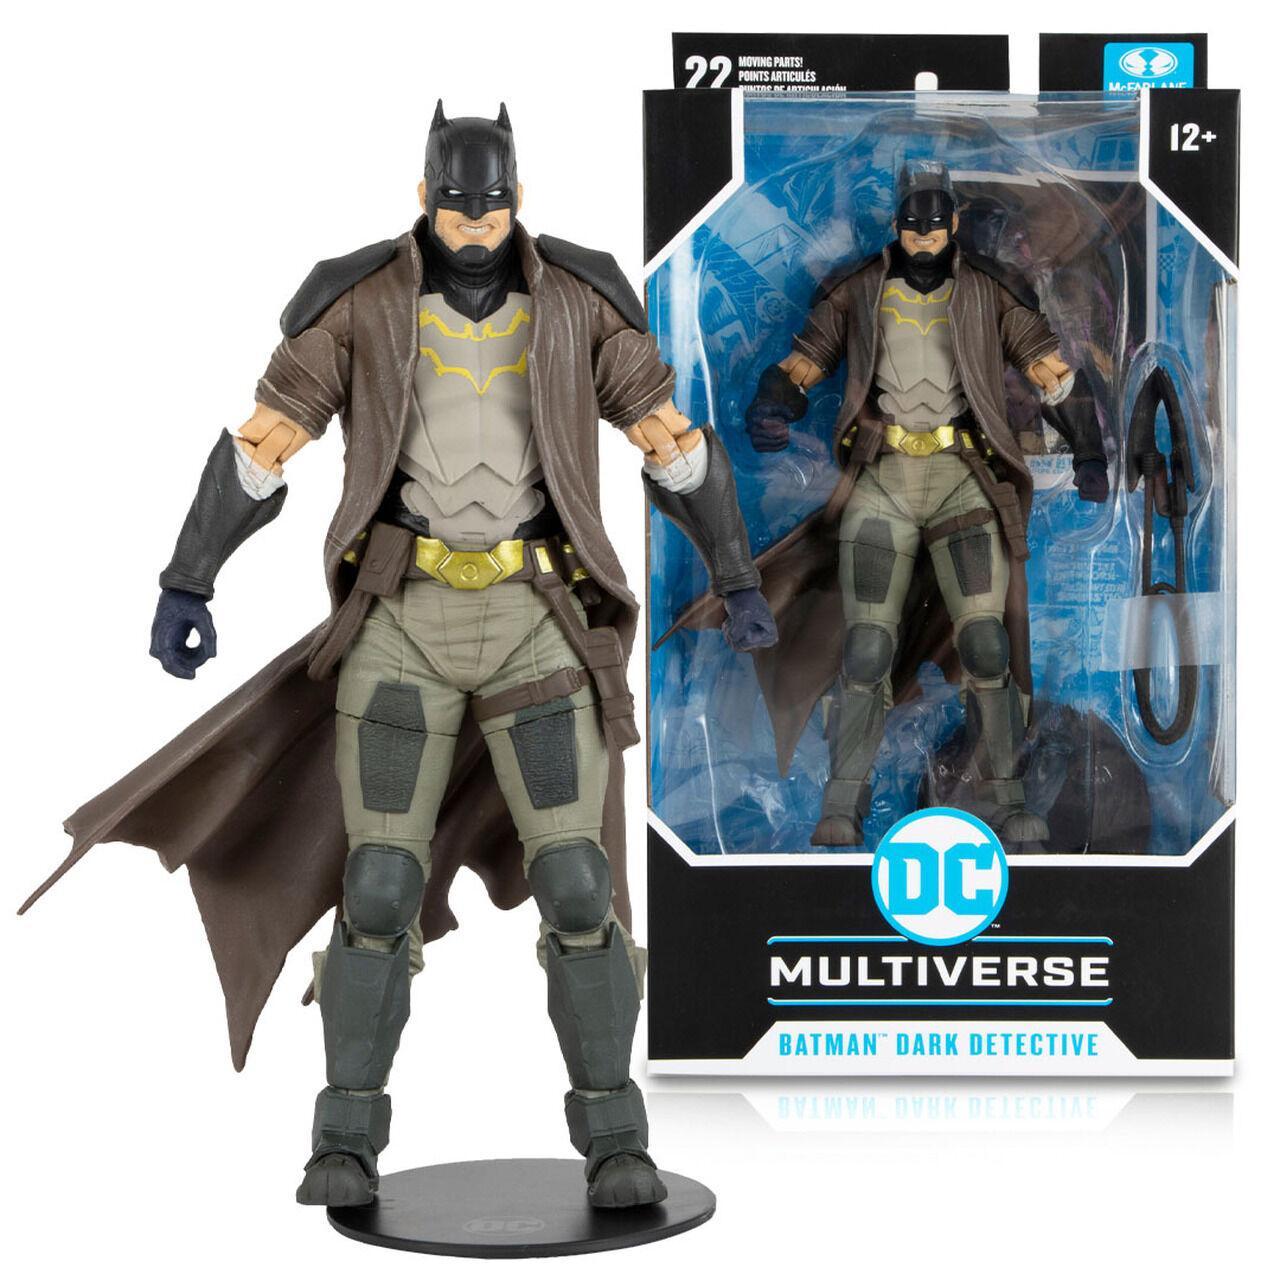 McFarlane Toys and Warner Bros. Discovery Global Consumer Products  Announcement